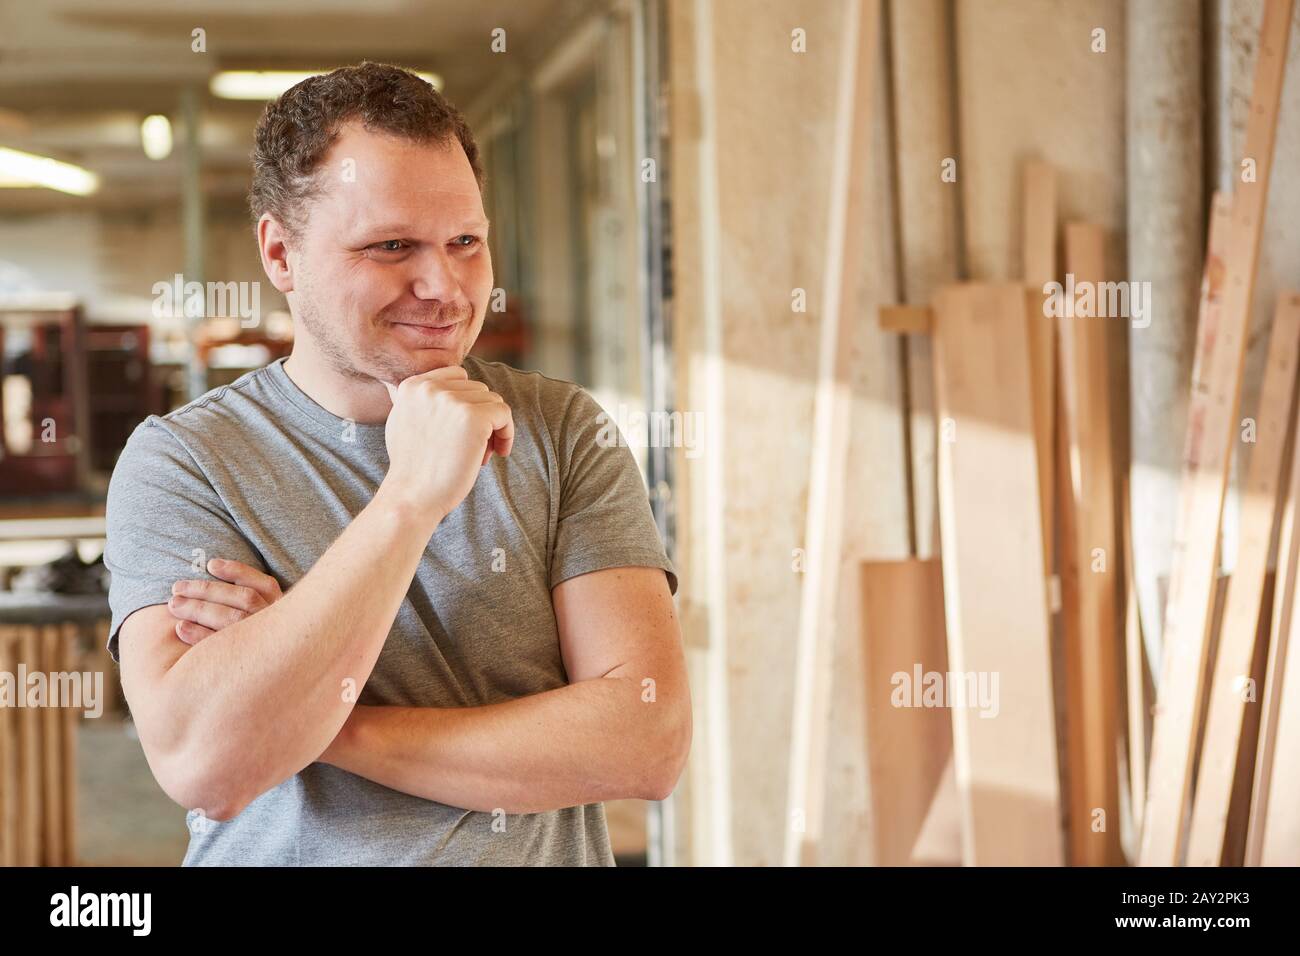 Smiling young man as a handyman in his carpentry operation Stock Photo